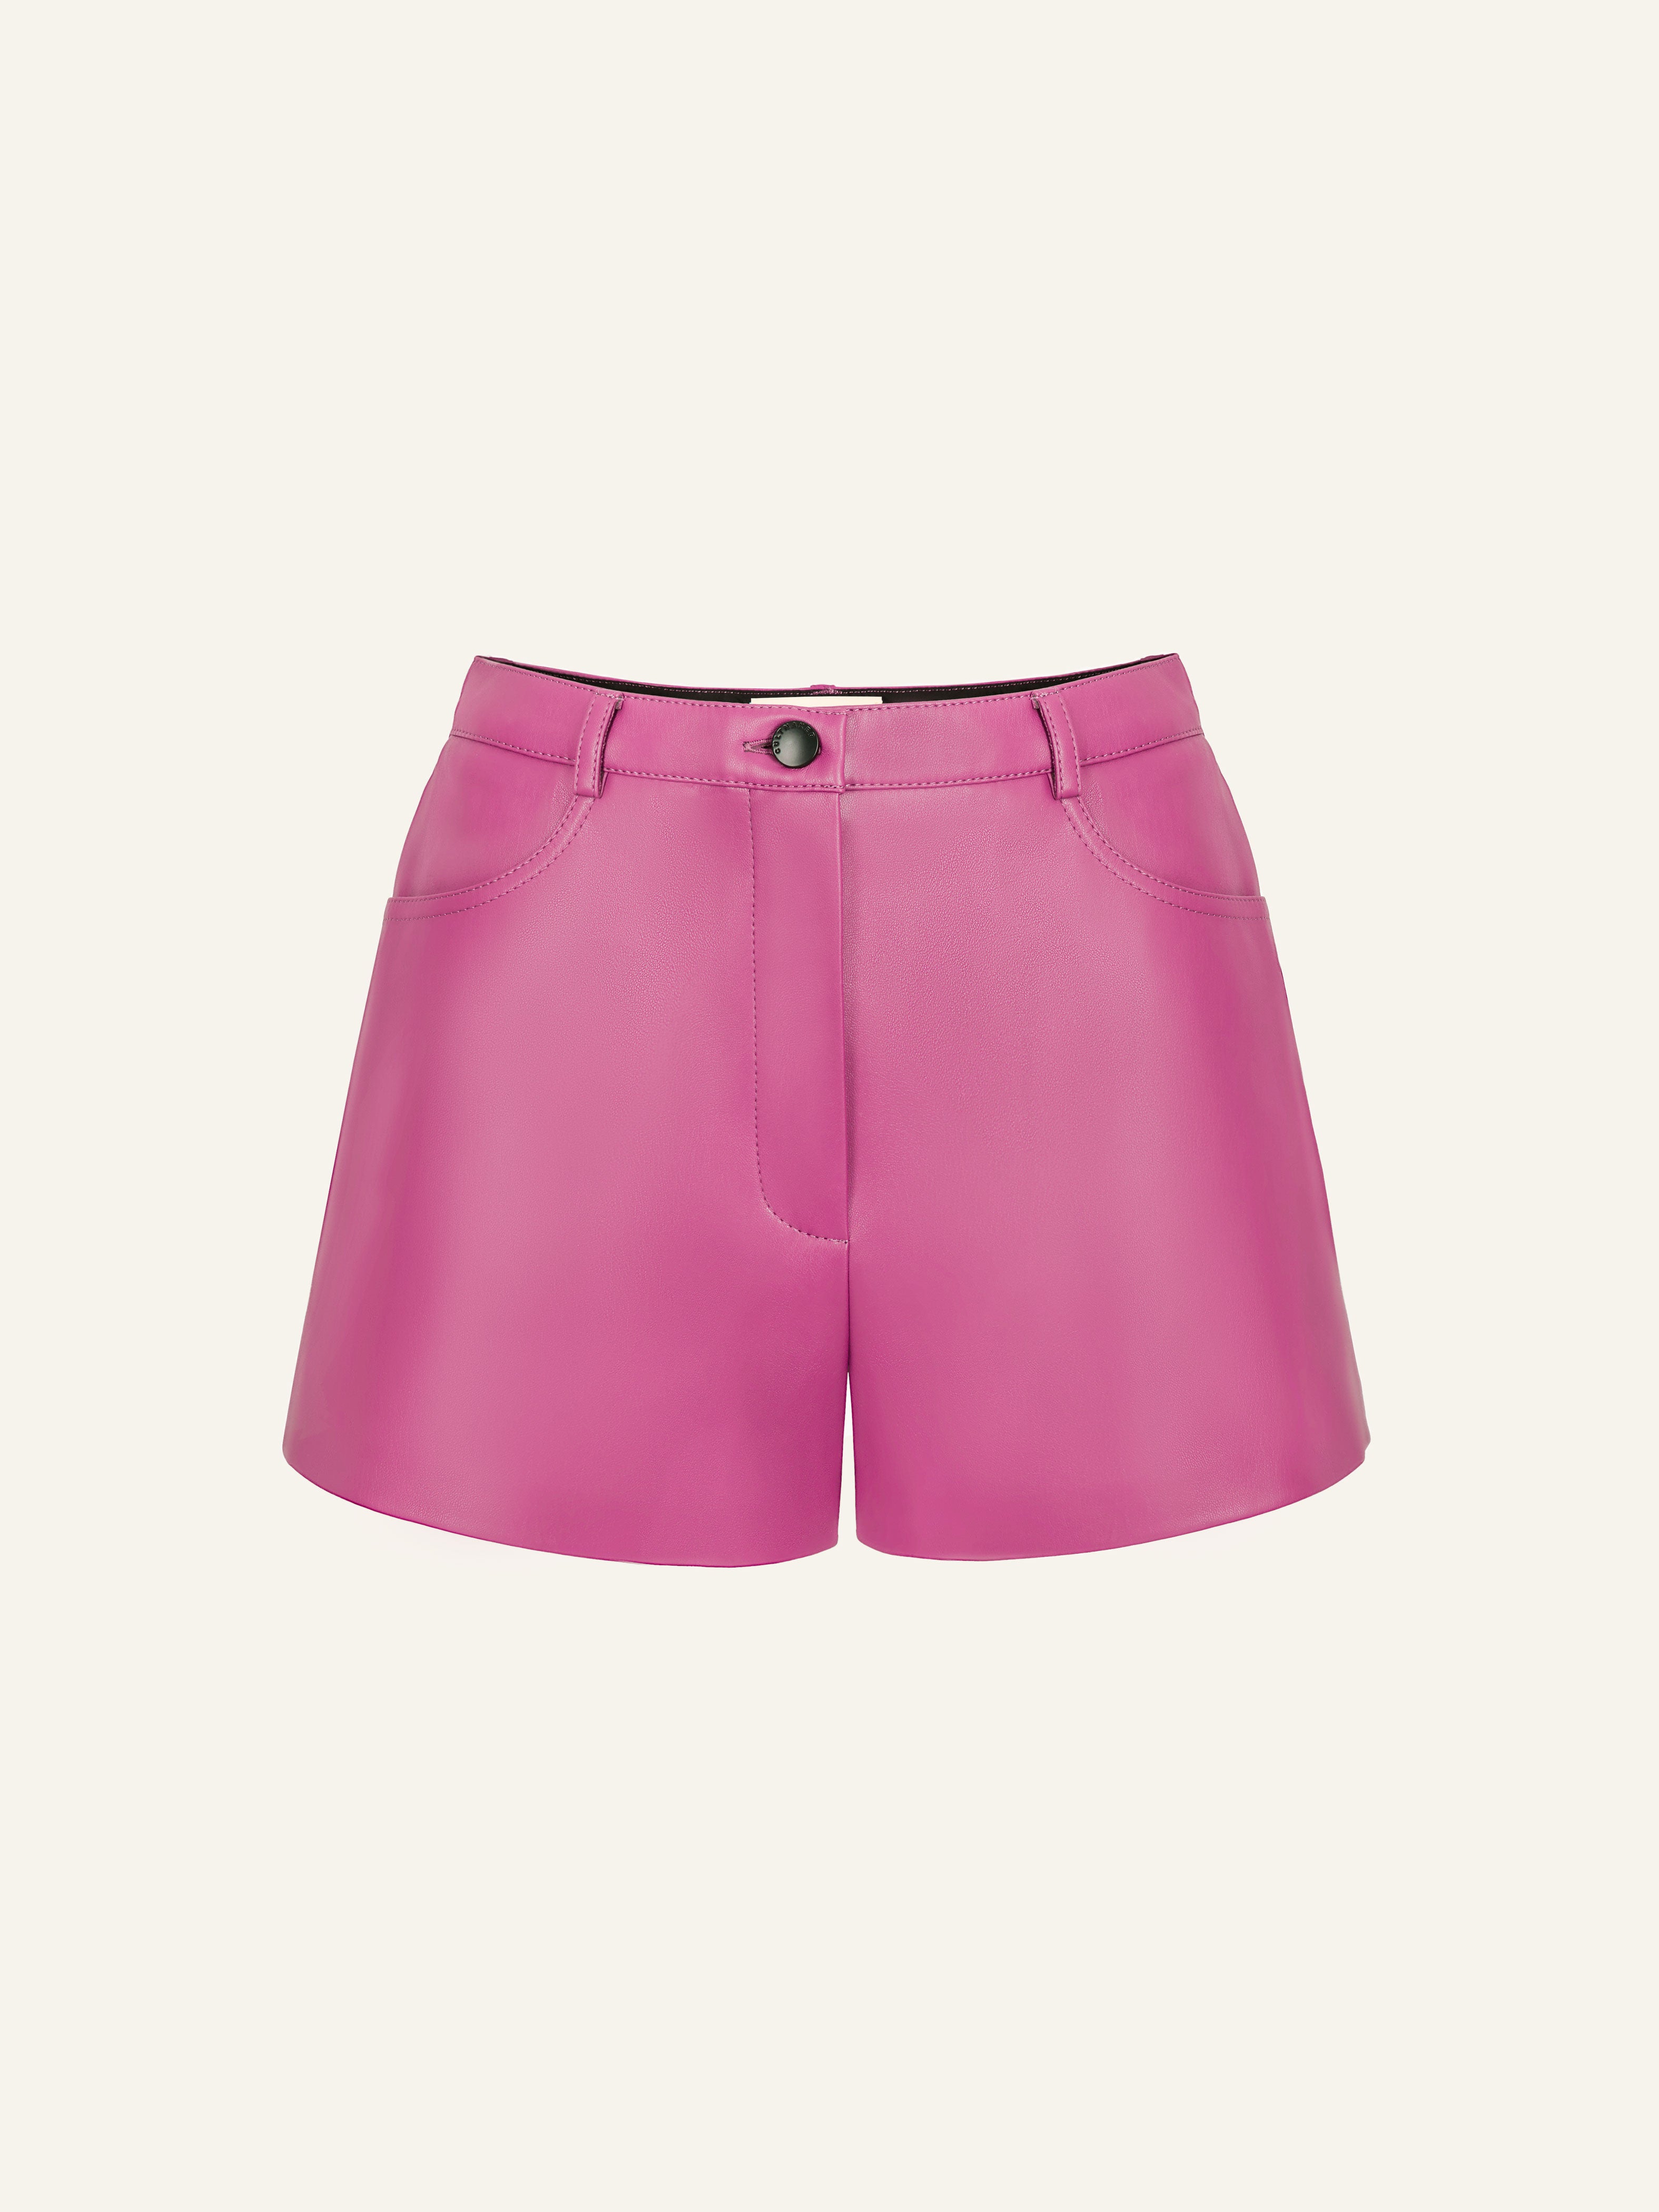 Product photo of pink vegan leather high rise shorts